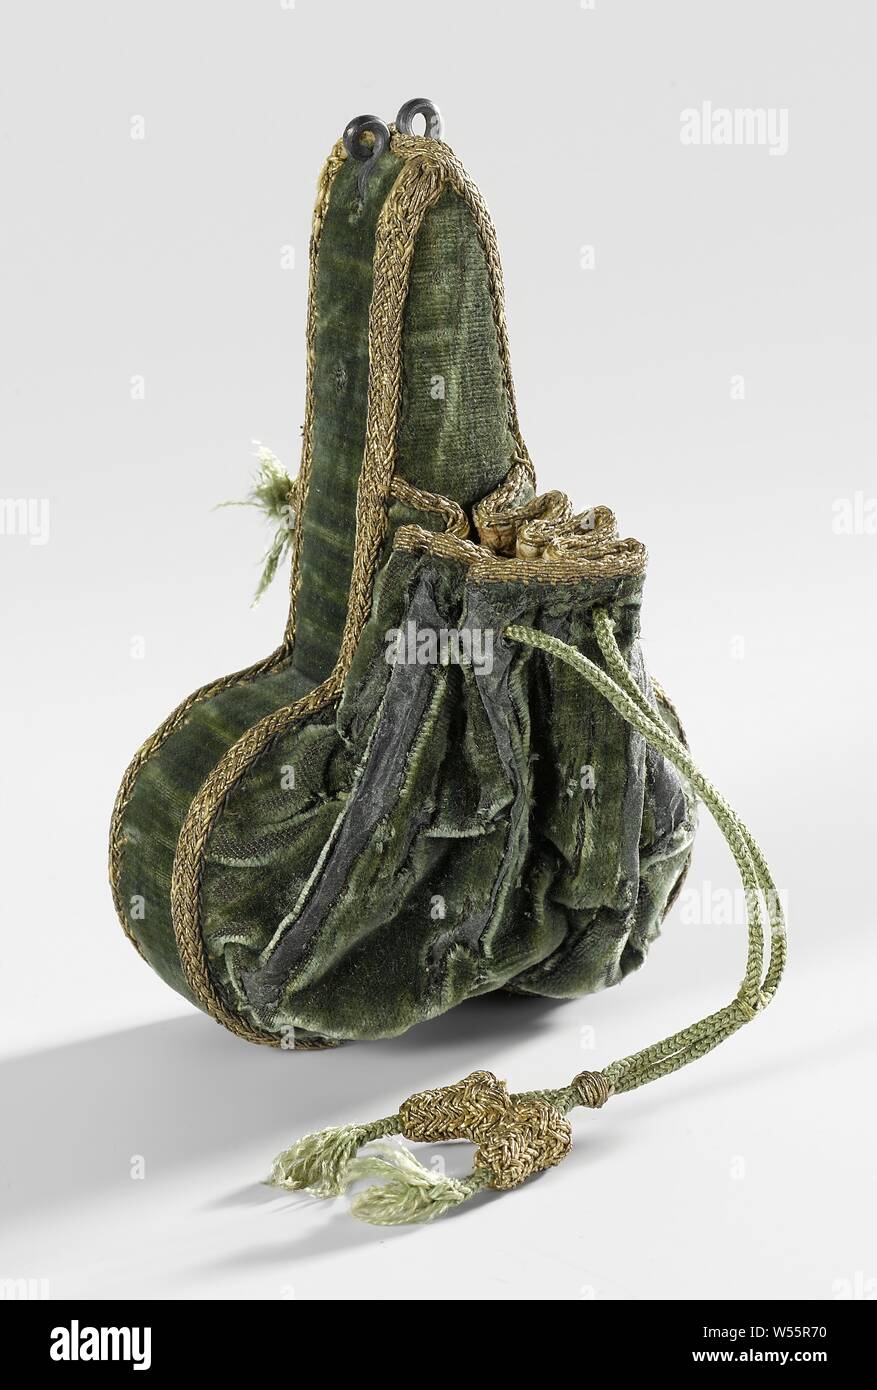 Purse of green velvet with drawstring and trimmed with gold thread on a box in the form of scissors (phallus?) made of ditto velvet and trimmings, with two metal eyes. At first glance, the object looks like a sheath for a pair of scissors with a small pouch on the front, lined with leather and provided with a drawstring of braided gold thread. However, the case cannot open and the pouch is so small that hardly any coins fit in it., anonymous, Netherlands (possibly), after 1580, bekleding, binnenwerk, passement, trekkoord, voering buideltje, ogen, forging, l 11 cm × w 7.5 cm Stock Photo